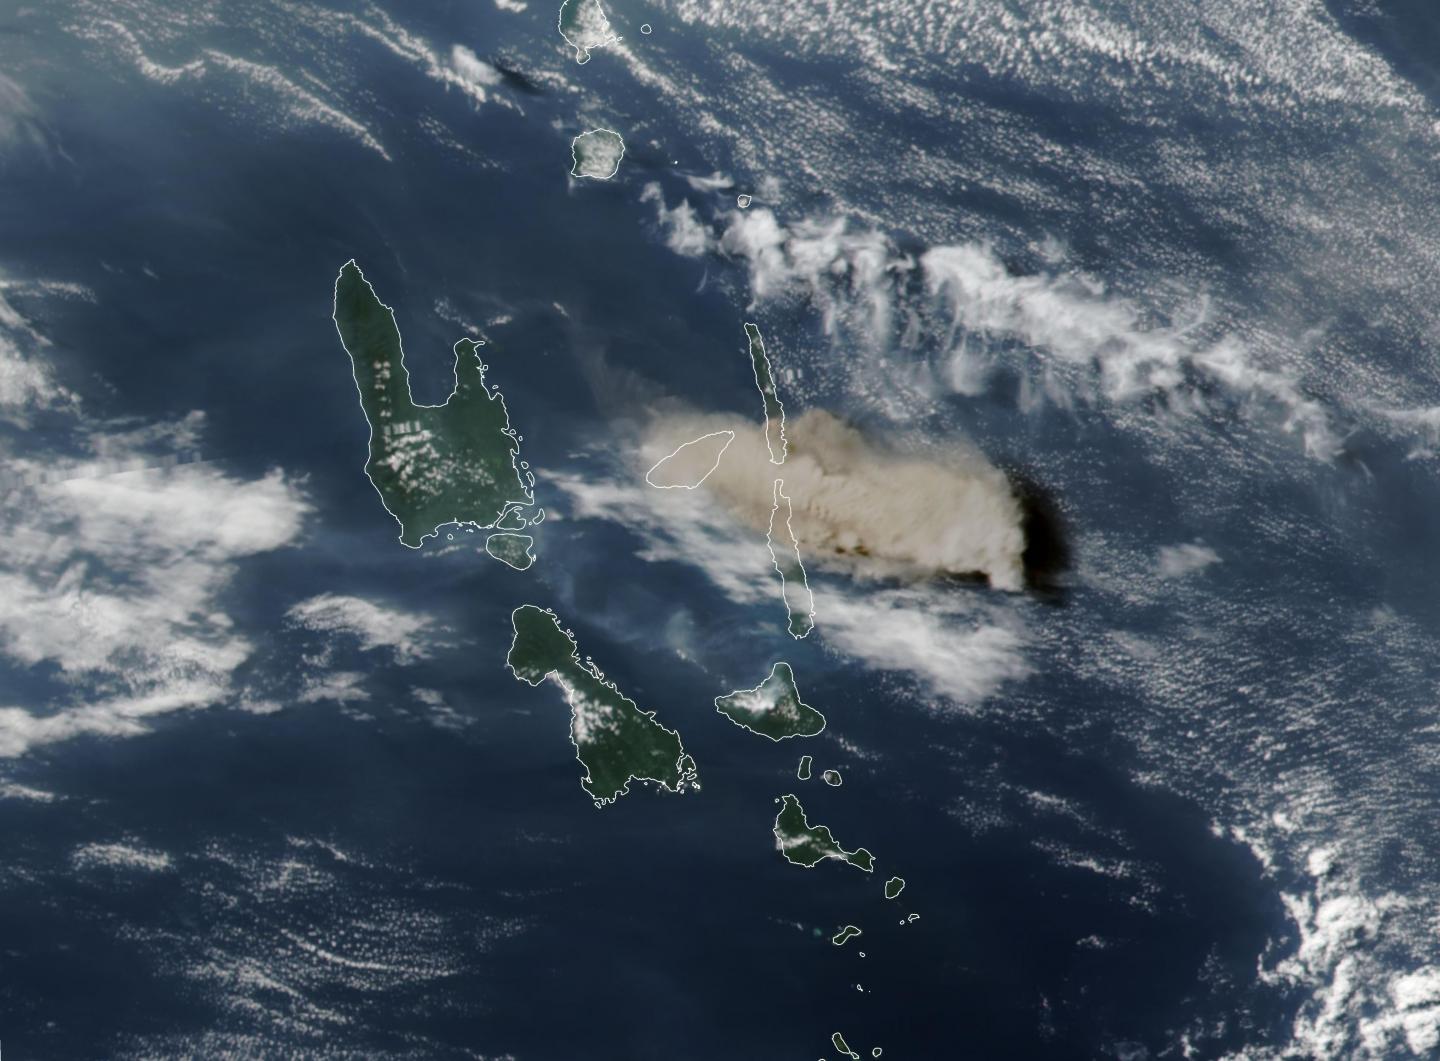 Image of the Eruption